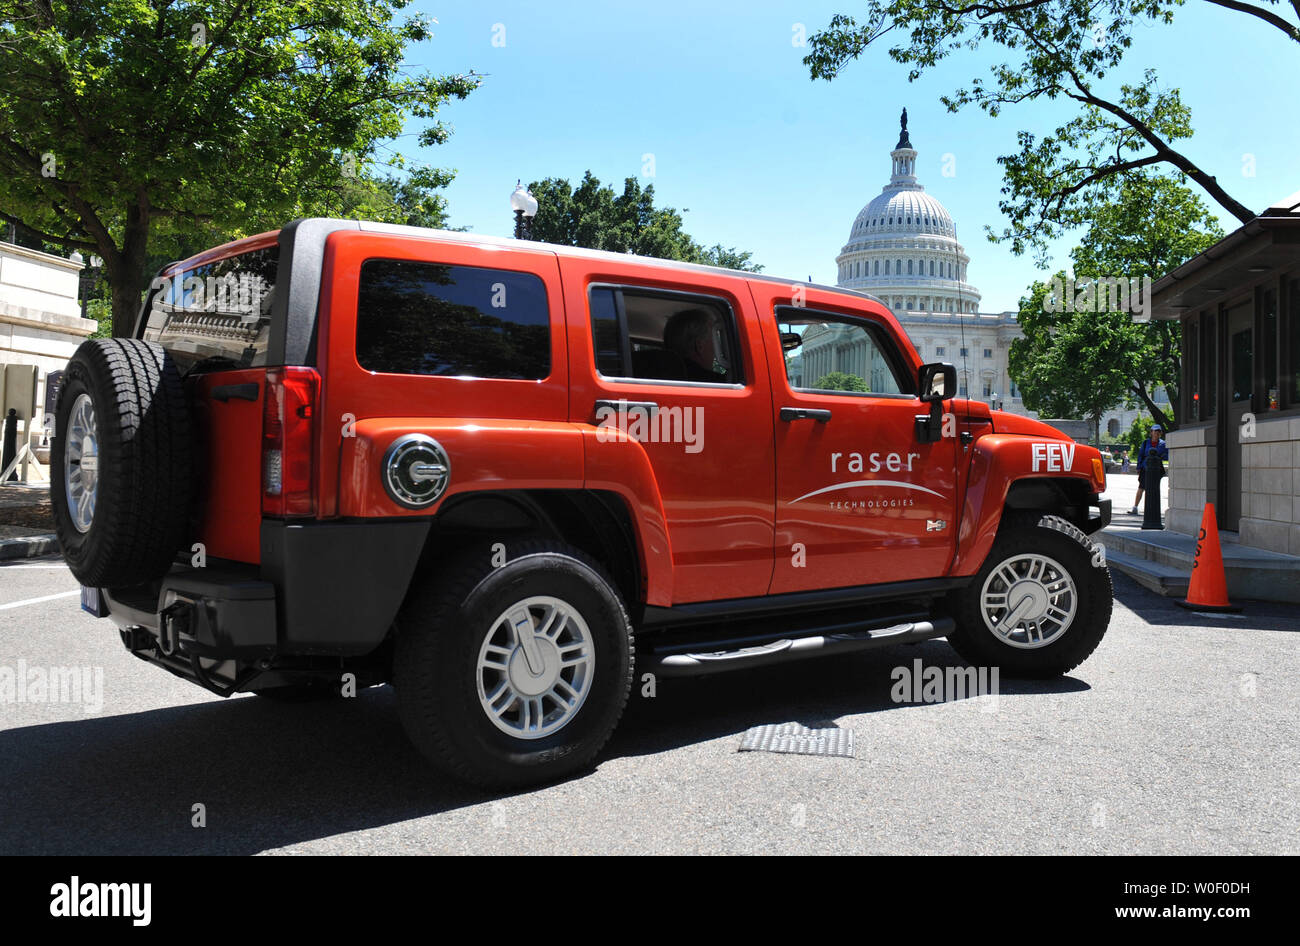 A 100 MPG hybrid electric Hummer, designed by Raser Technologies, is seen  on display near the U.S. Capitol Building in Washington on May 20, 2009.  Raser Technologies said that their technology could